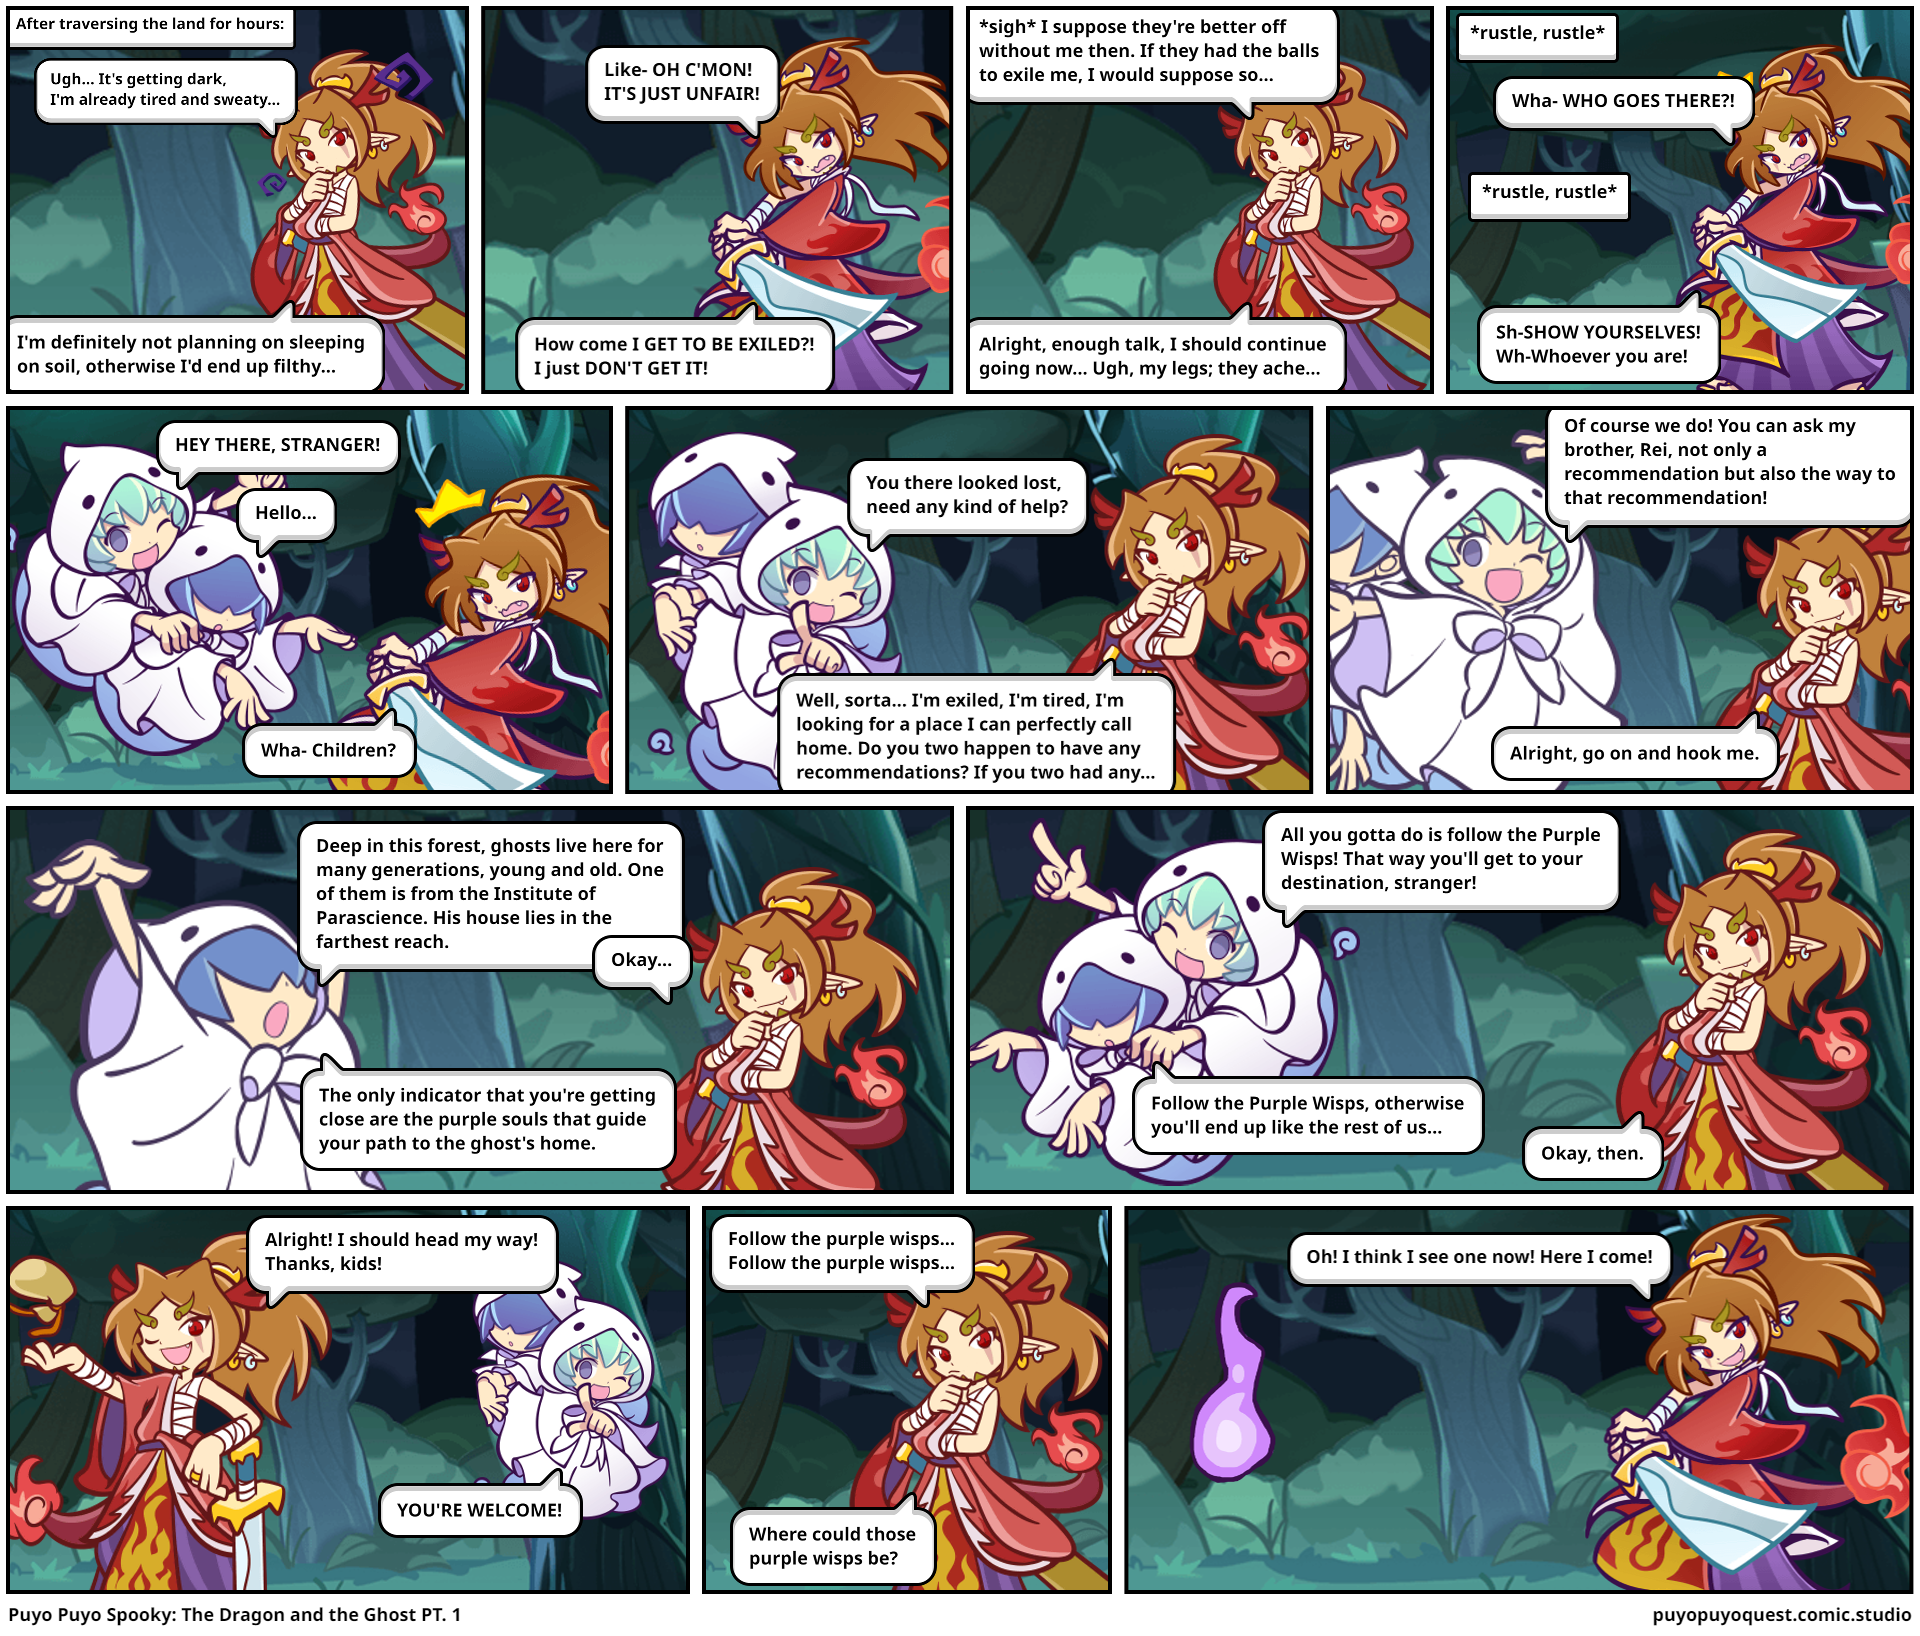 Puyo Puyo Spooky: The Dragon and the Ghost PT. 1